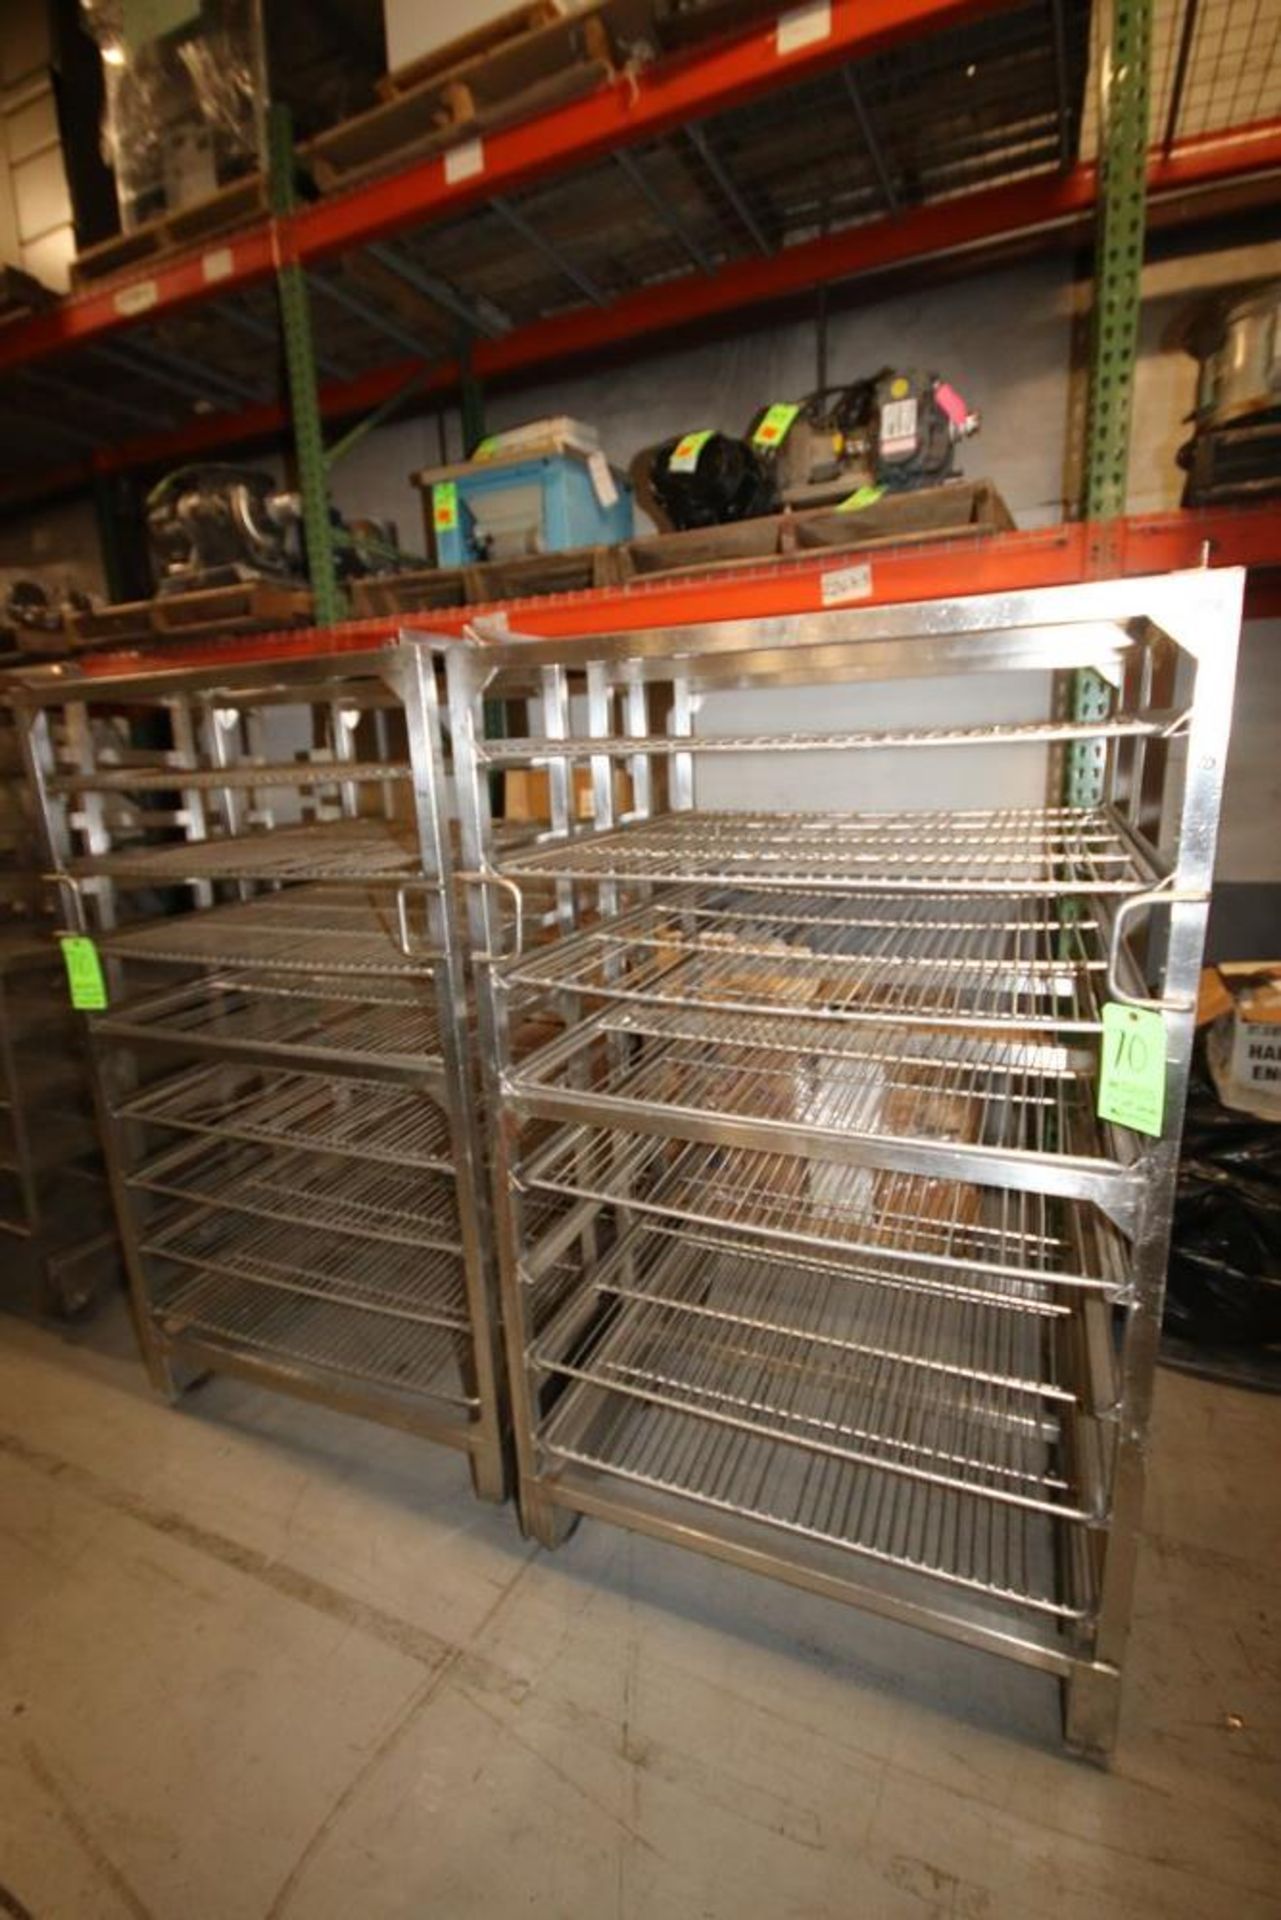 Portable S/S Racks, with (7) Shelves, Overall Dims.: Aprox. 40" L x 41" W x 71"H (LOCATED @ M. DAVIS - Image 2 of 2